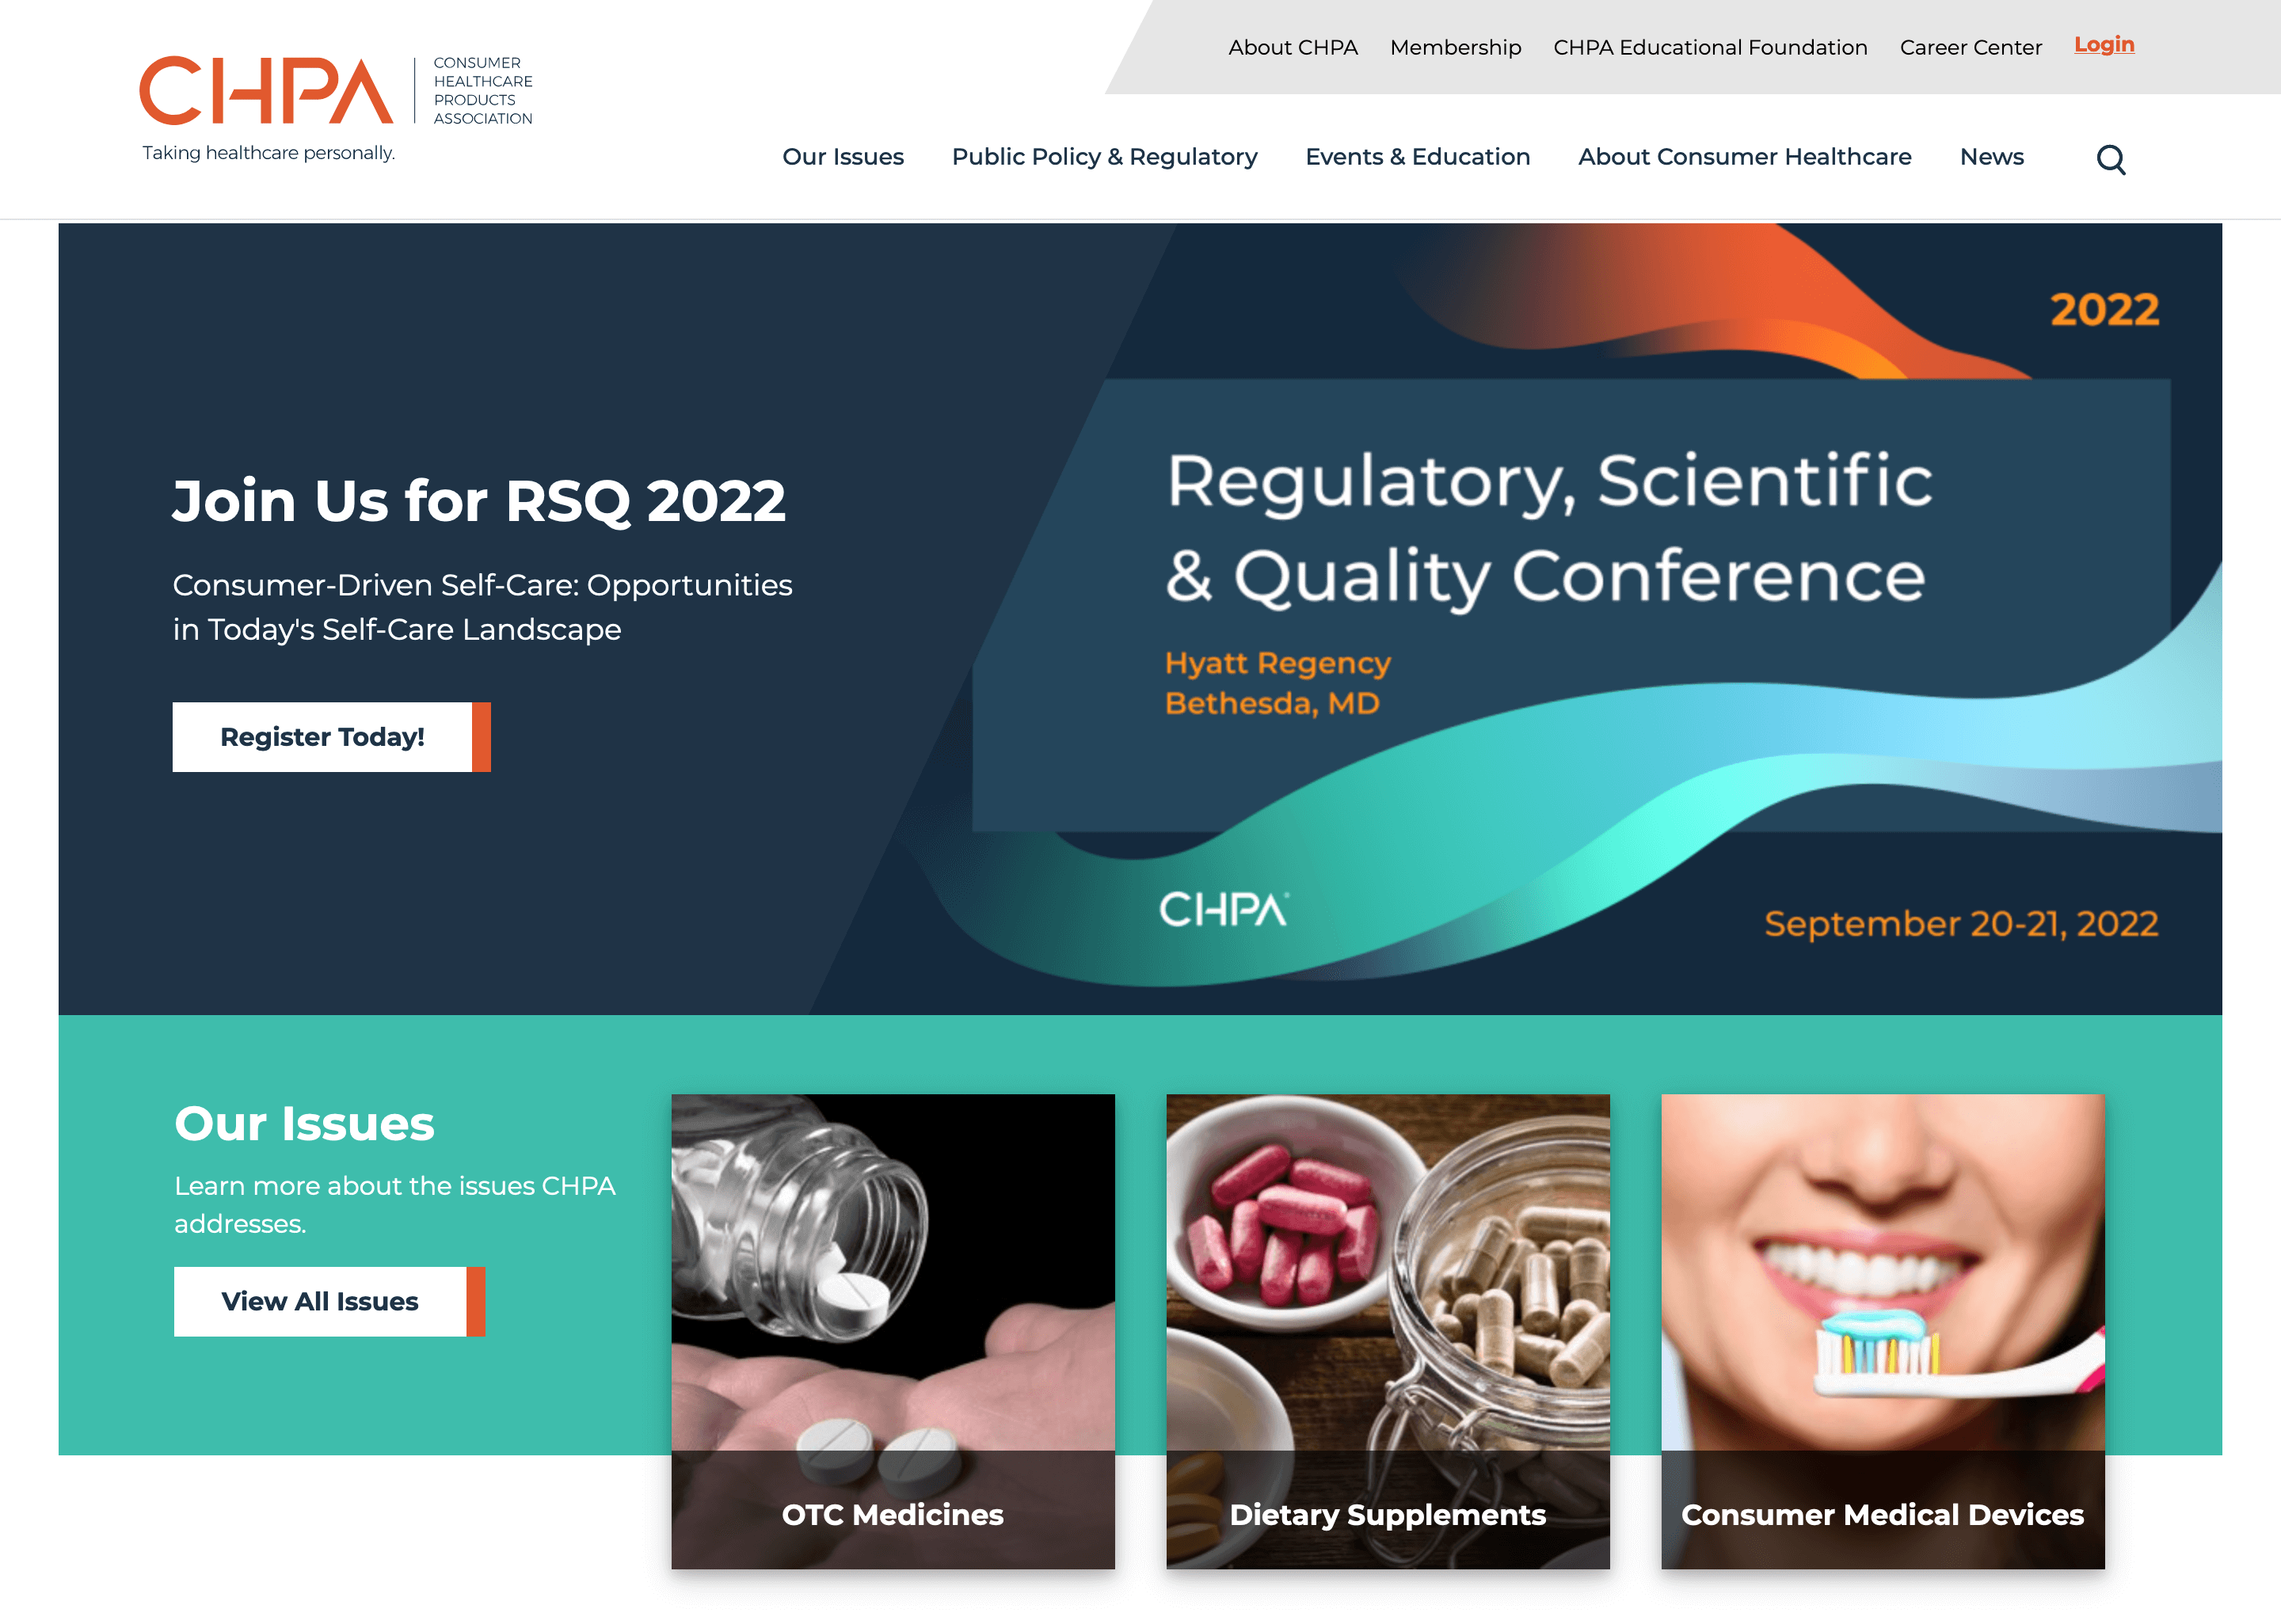 A cropped screenshot of the top hero section of CHPA's homepage